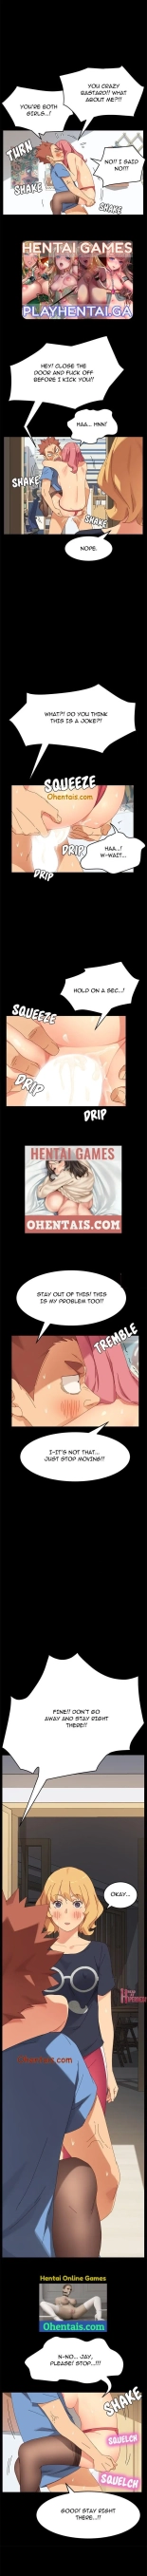 The Perfect Roommates Ch. 10-11 : page 12